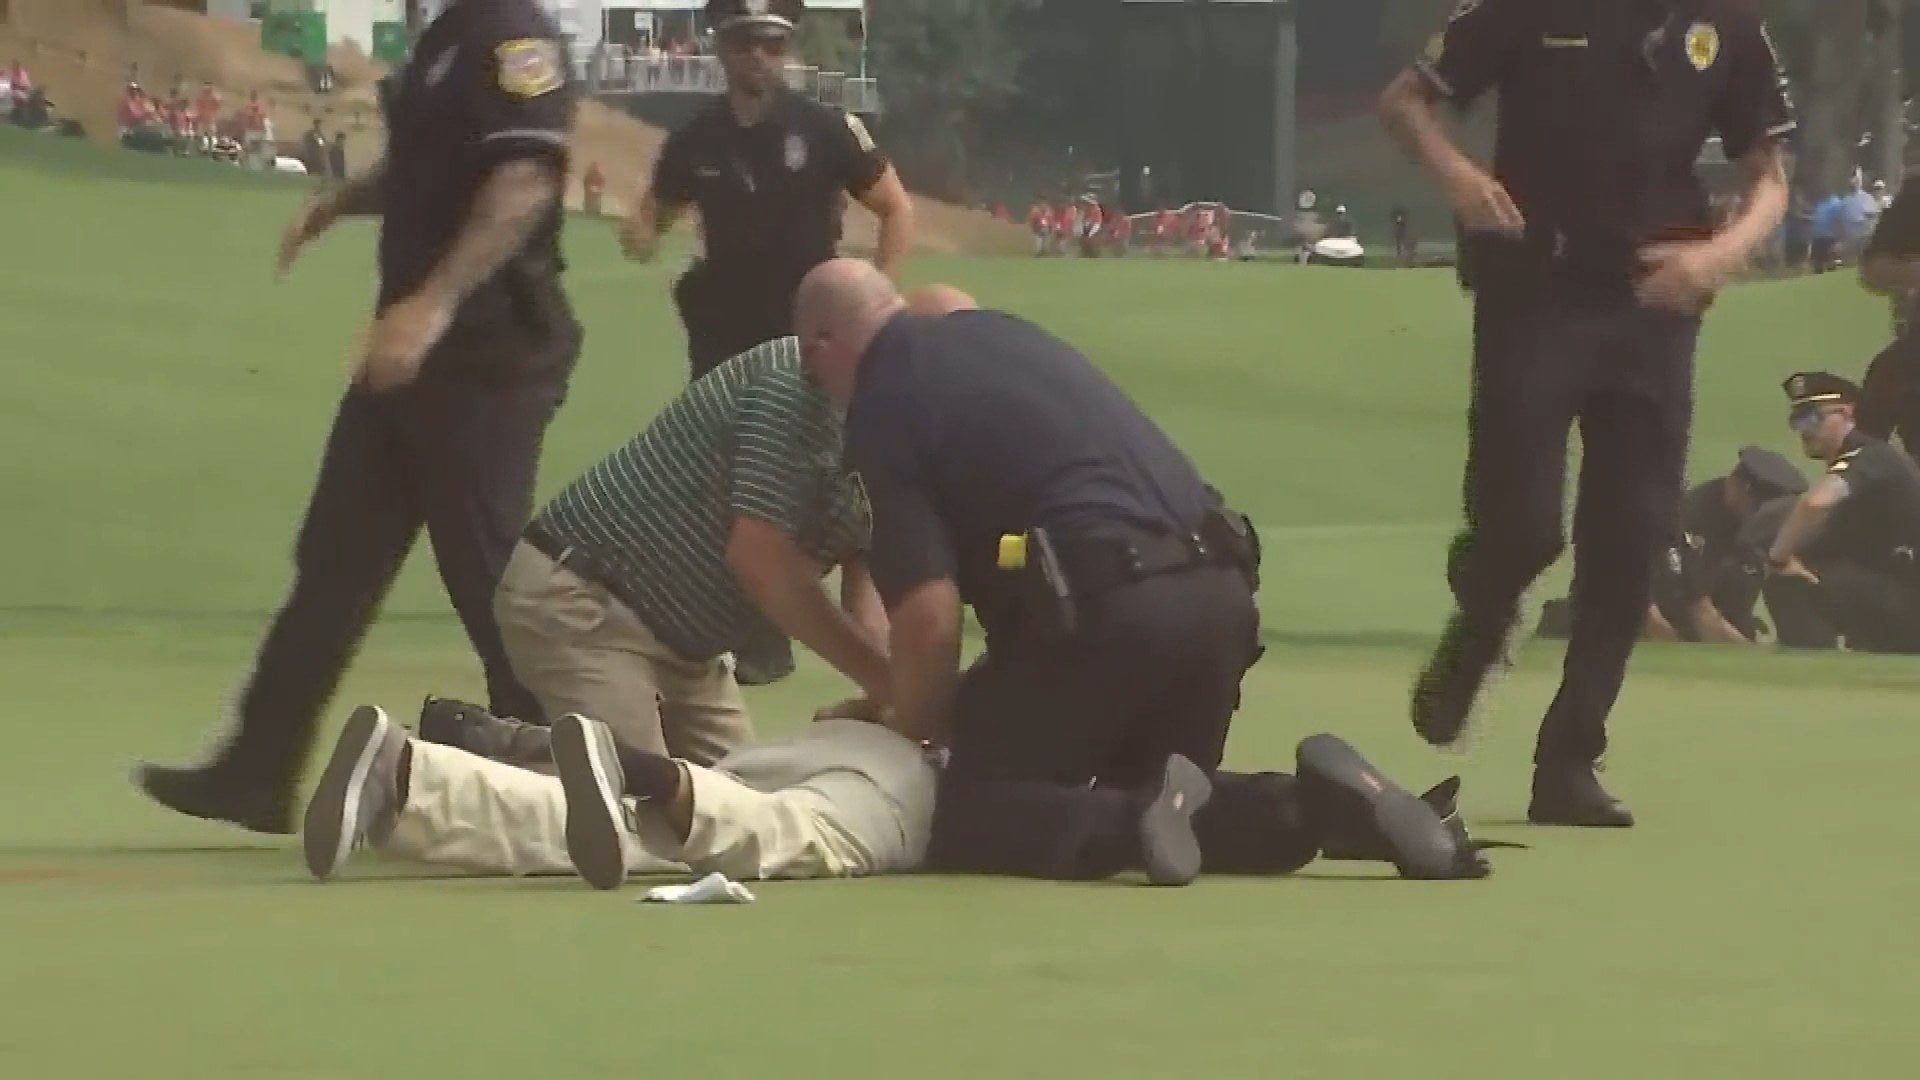 Protesters Storm Golf Course During Travelers Championship Game